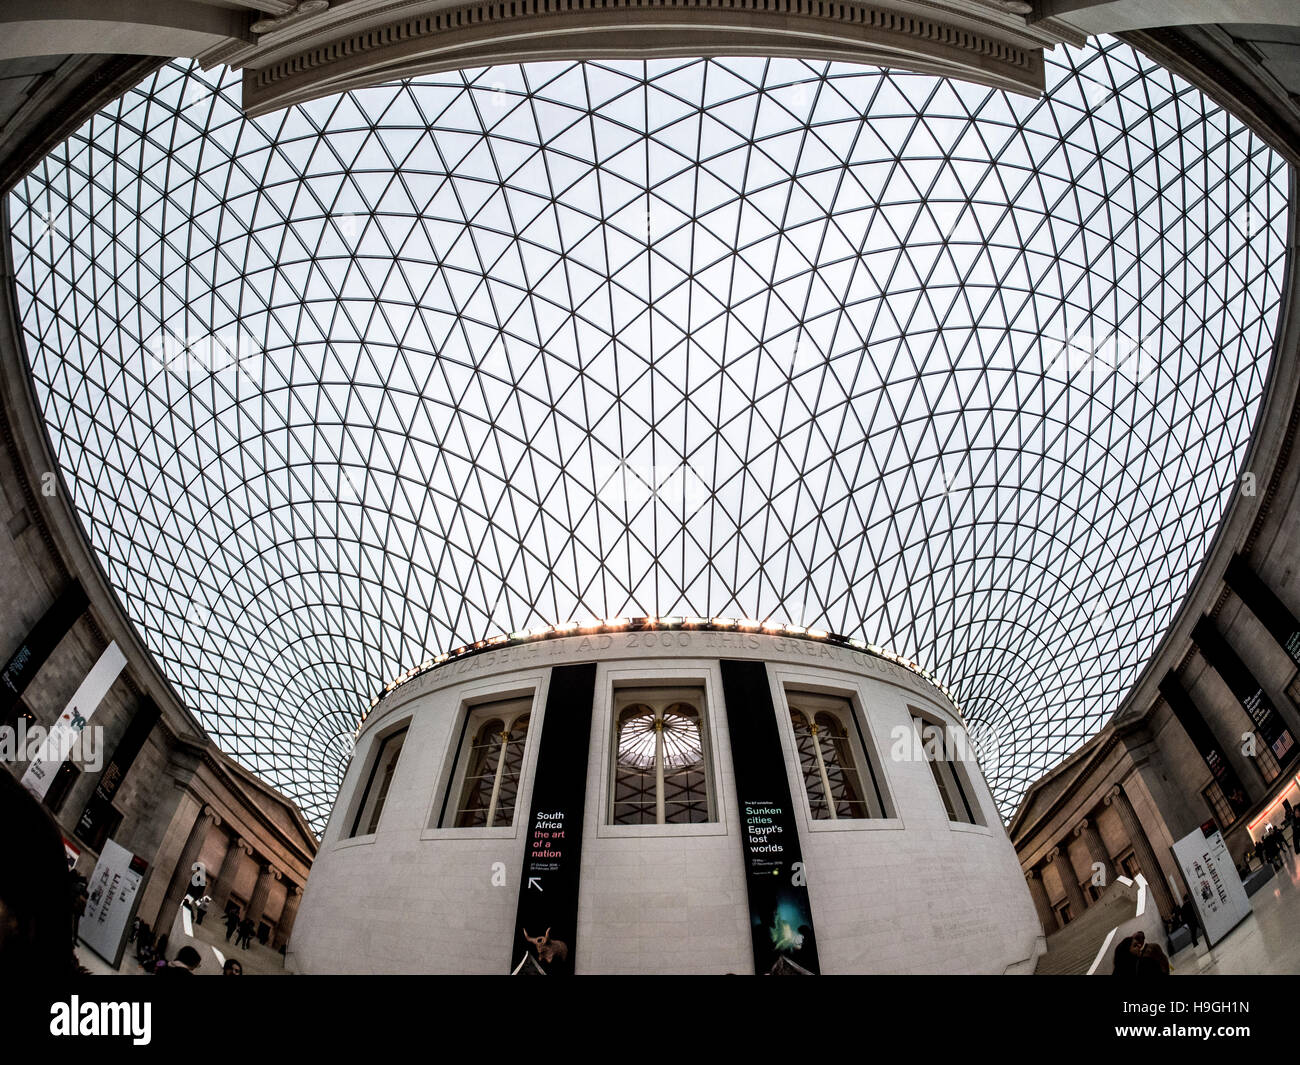 Queen Elizabeth II Great Court designed by Foster and Partners, The British Museum, London, UK. Stock Photo